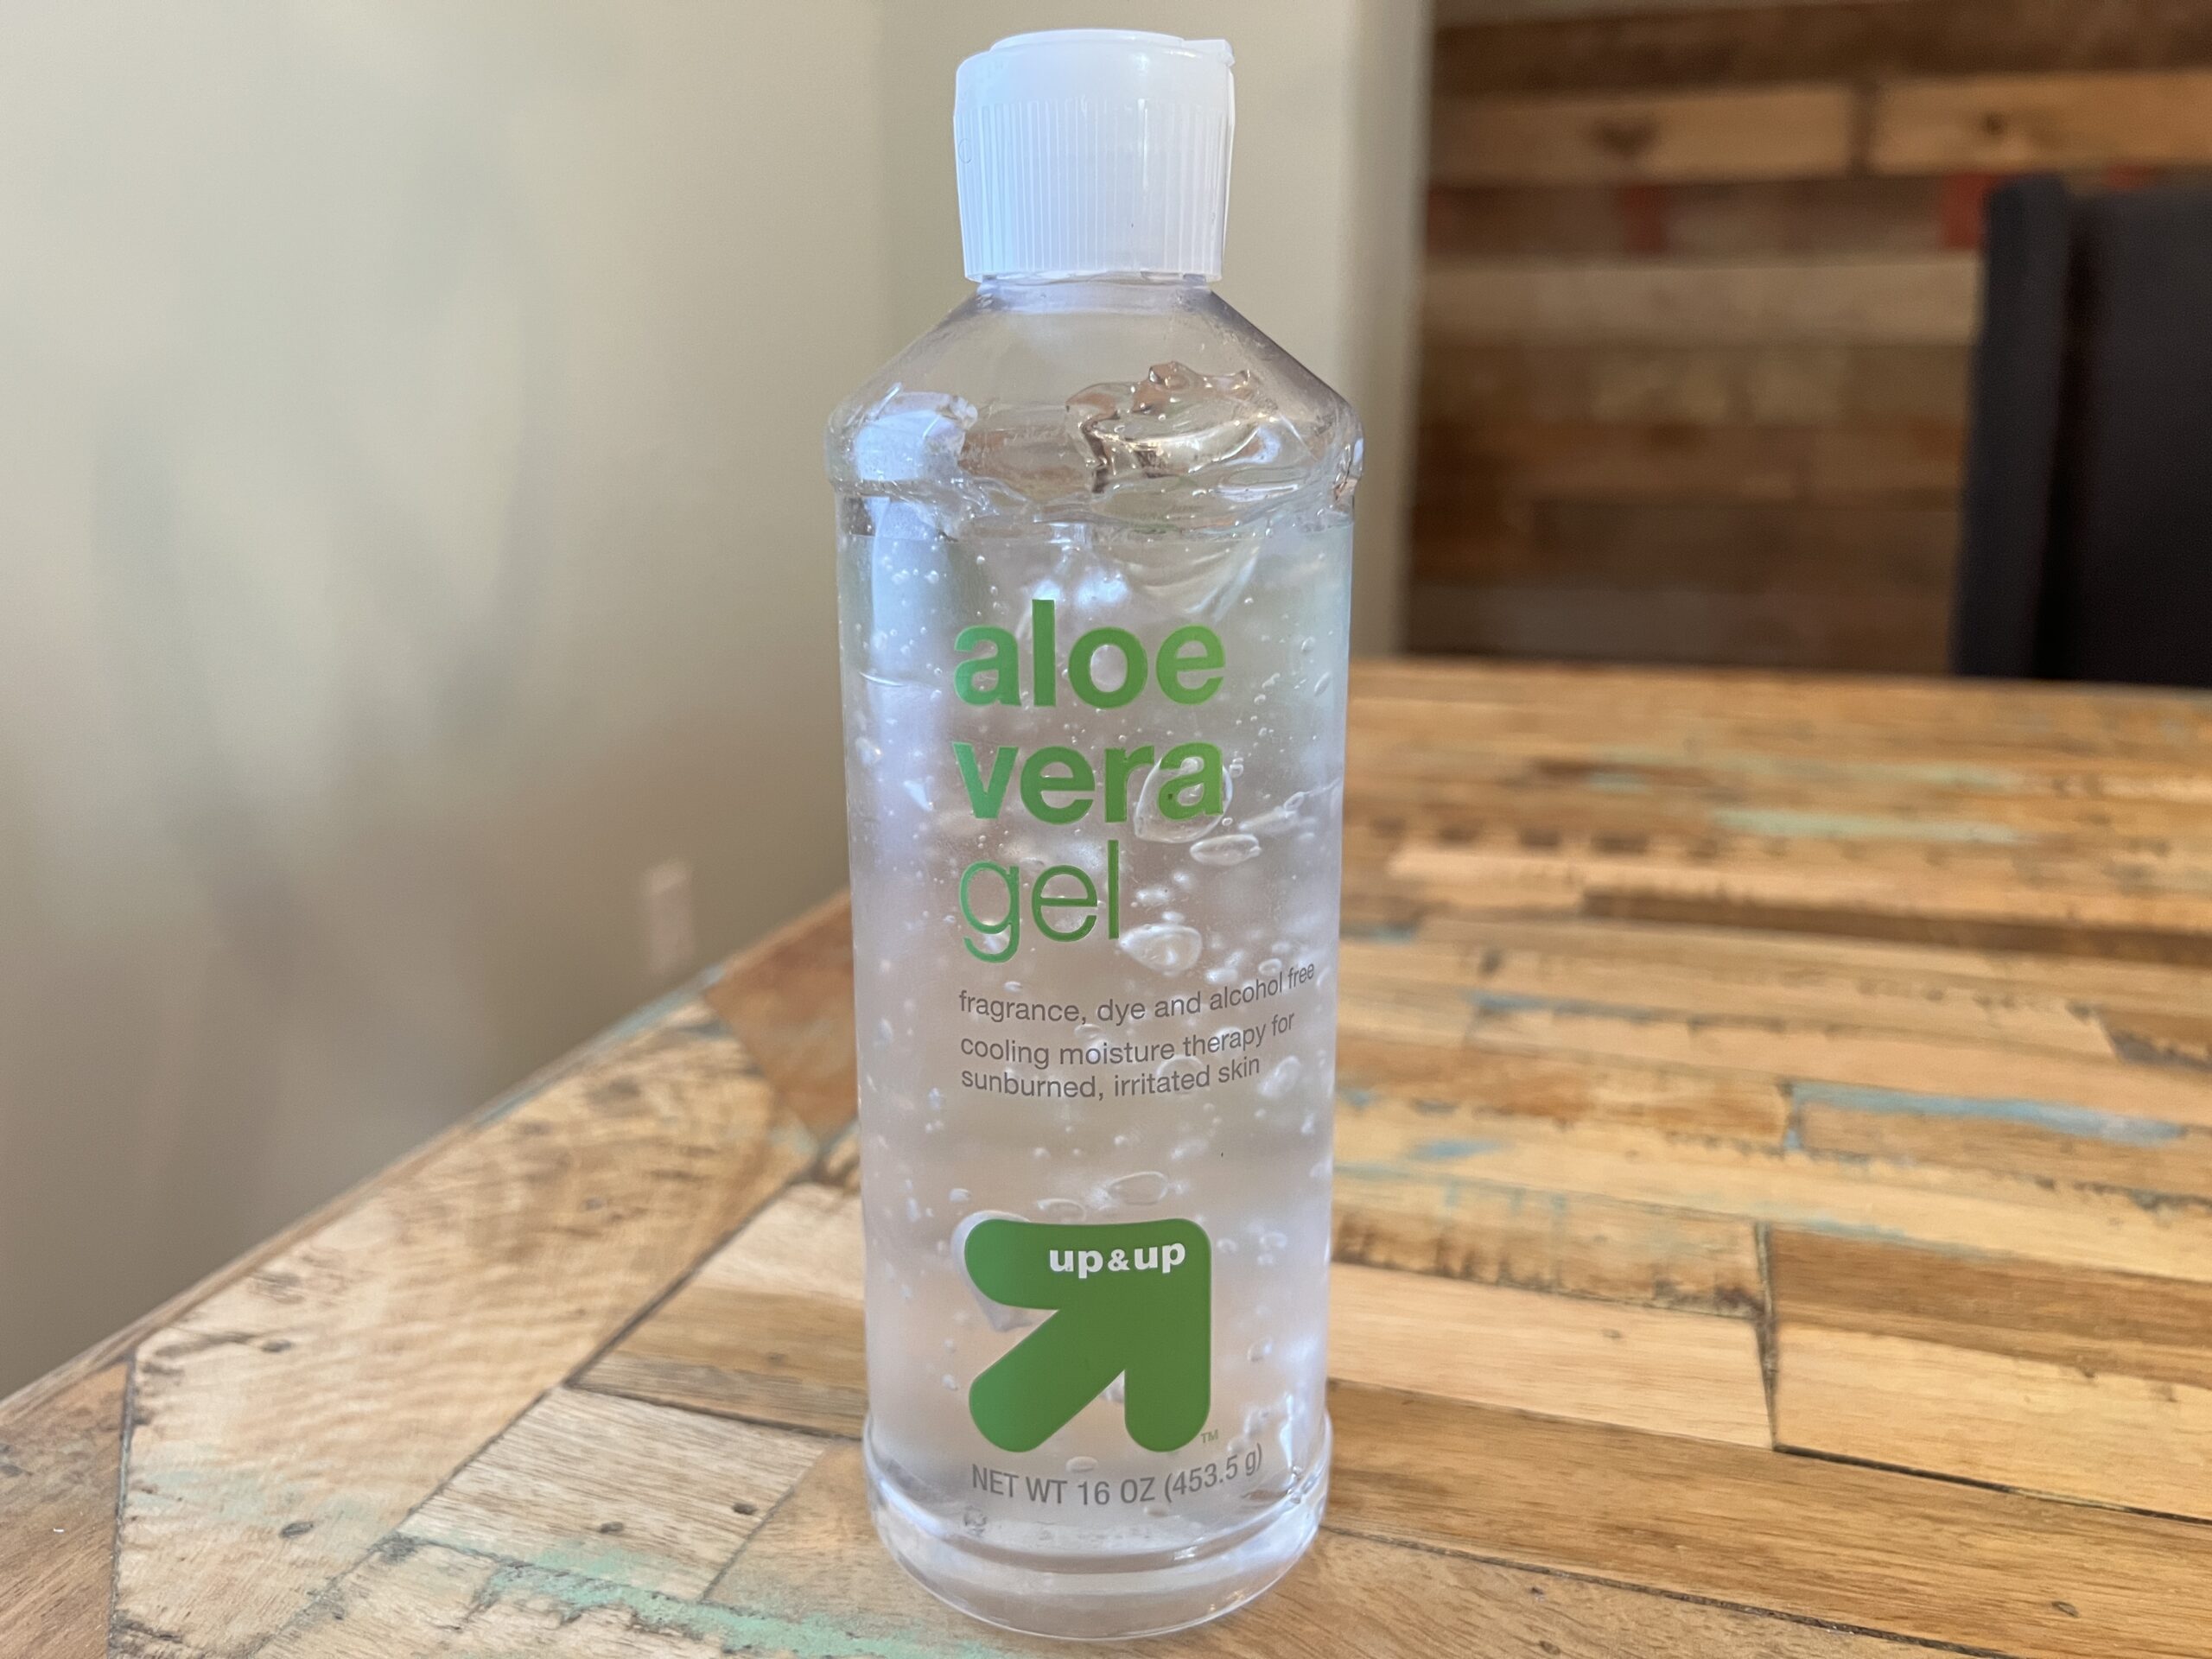 Aloe vera gel that's fragrance, dye, and alcohol-free for cooling moisture therapy.